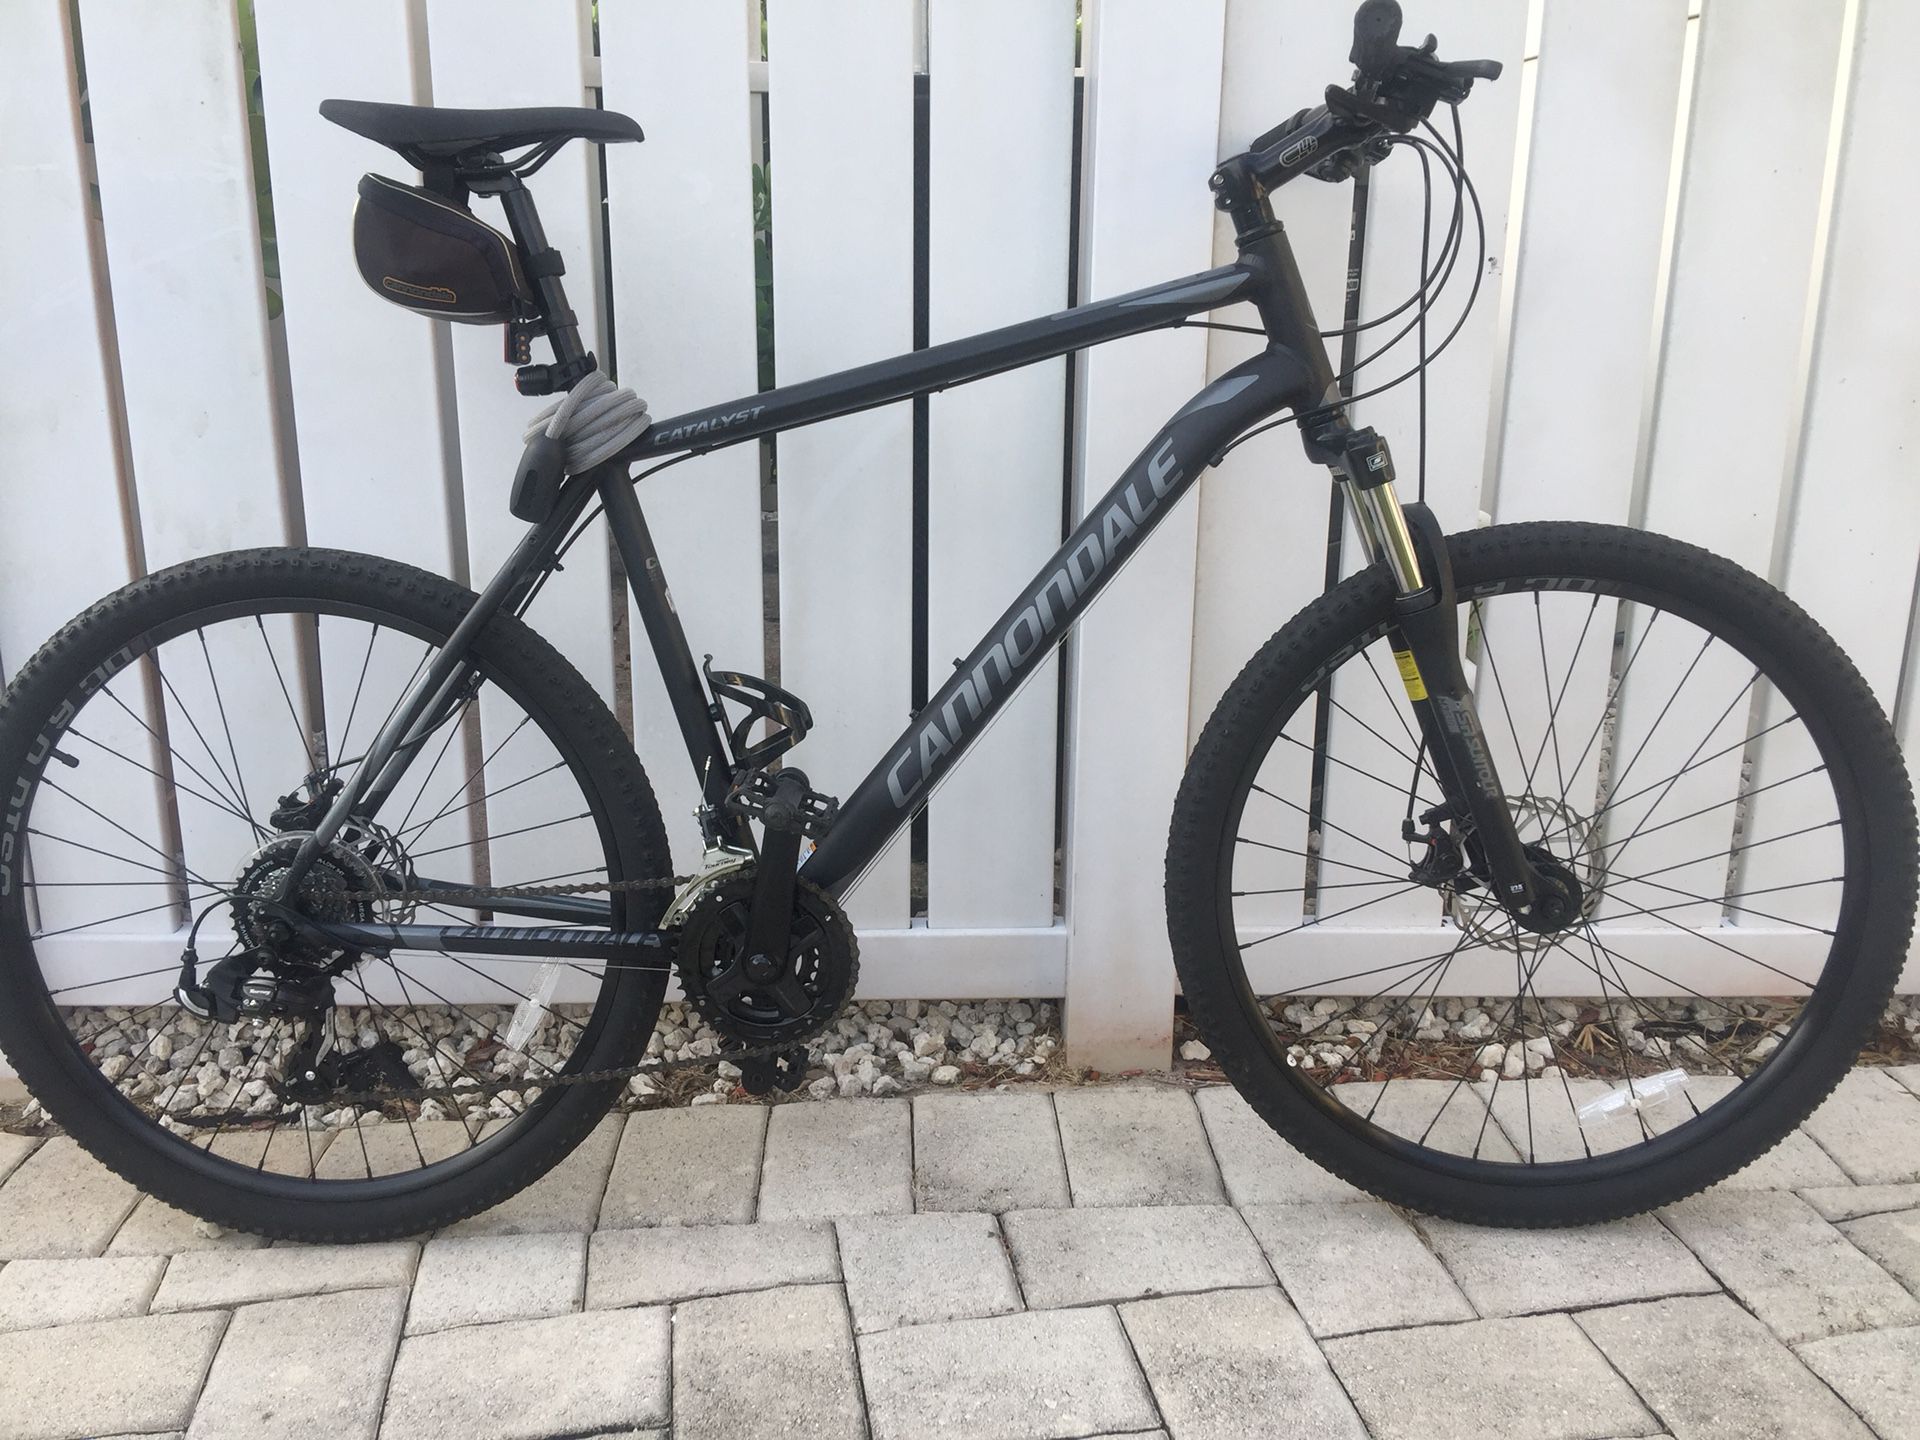 Specifiek bezig Rechtmatig Cannondale Catalyst, Dual Disc brakes, XL frame, 27.5” wheels, Excellent  Condition!! for Sale in Pompano Beach, FL - OfferUp